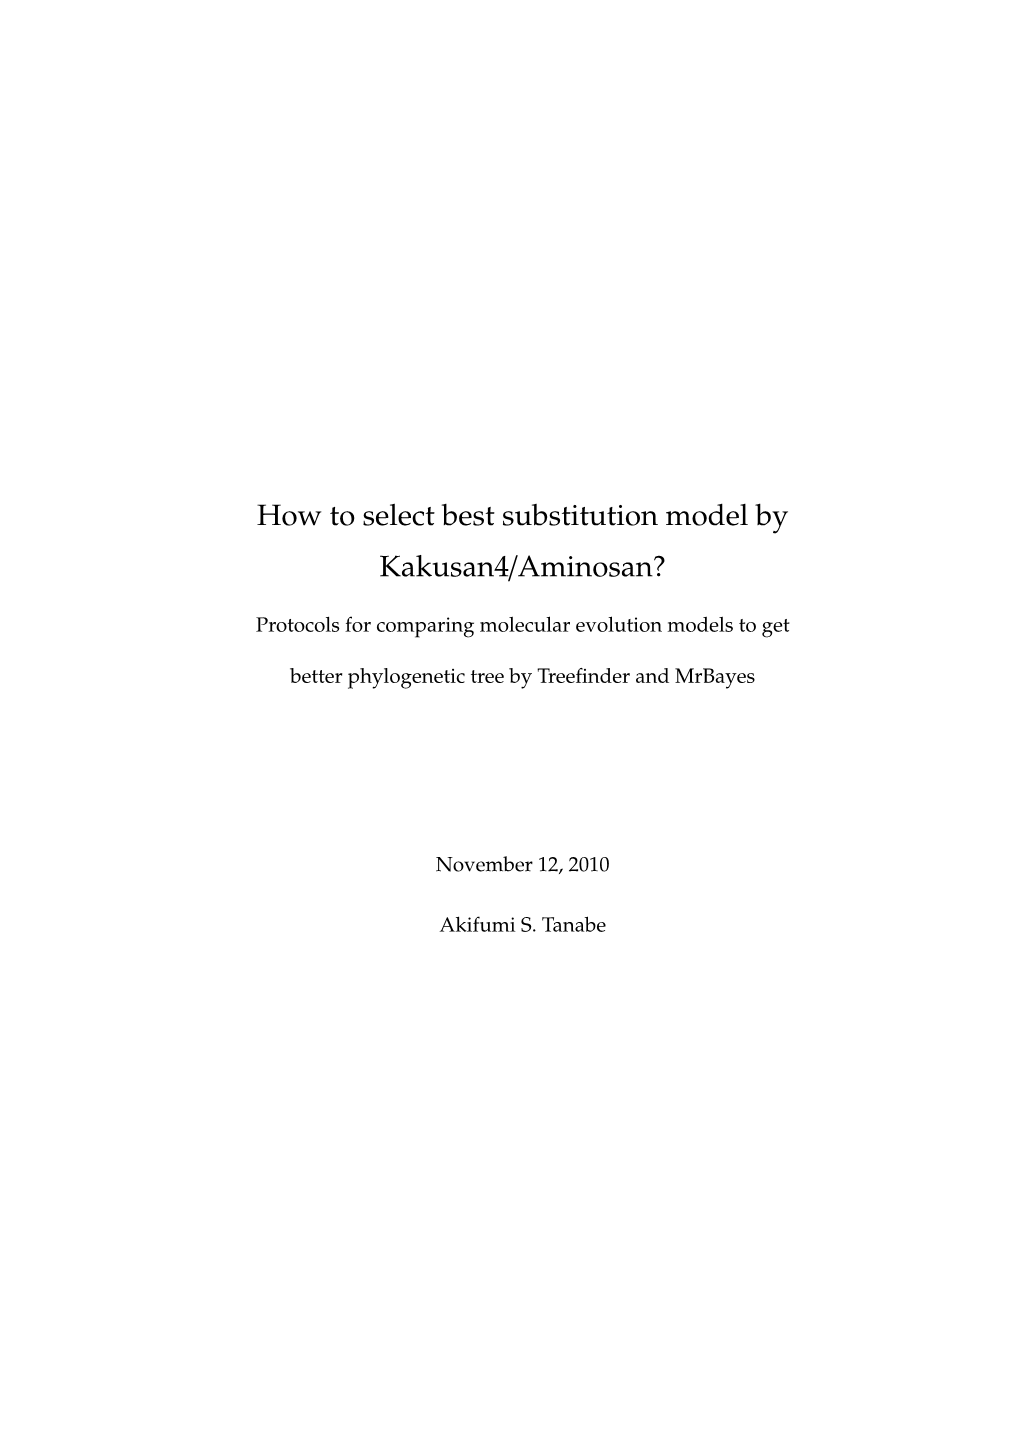 How to Select Best Substitution Model by Kakusan4/Aminosan?